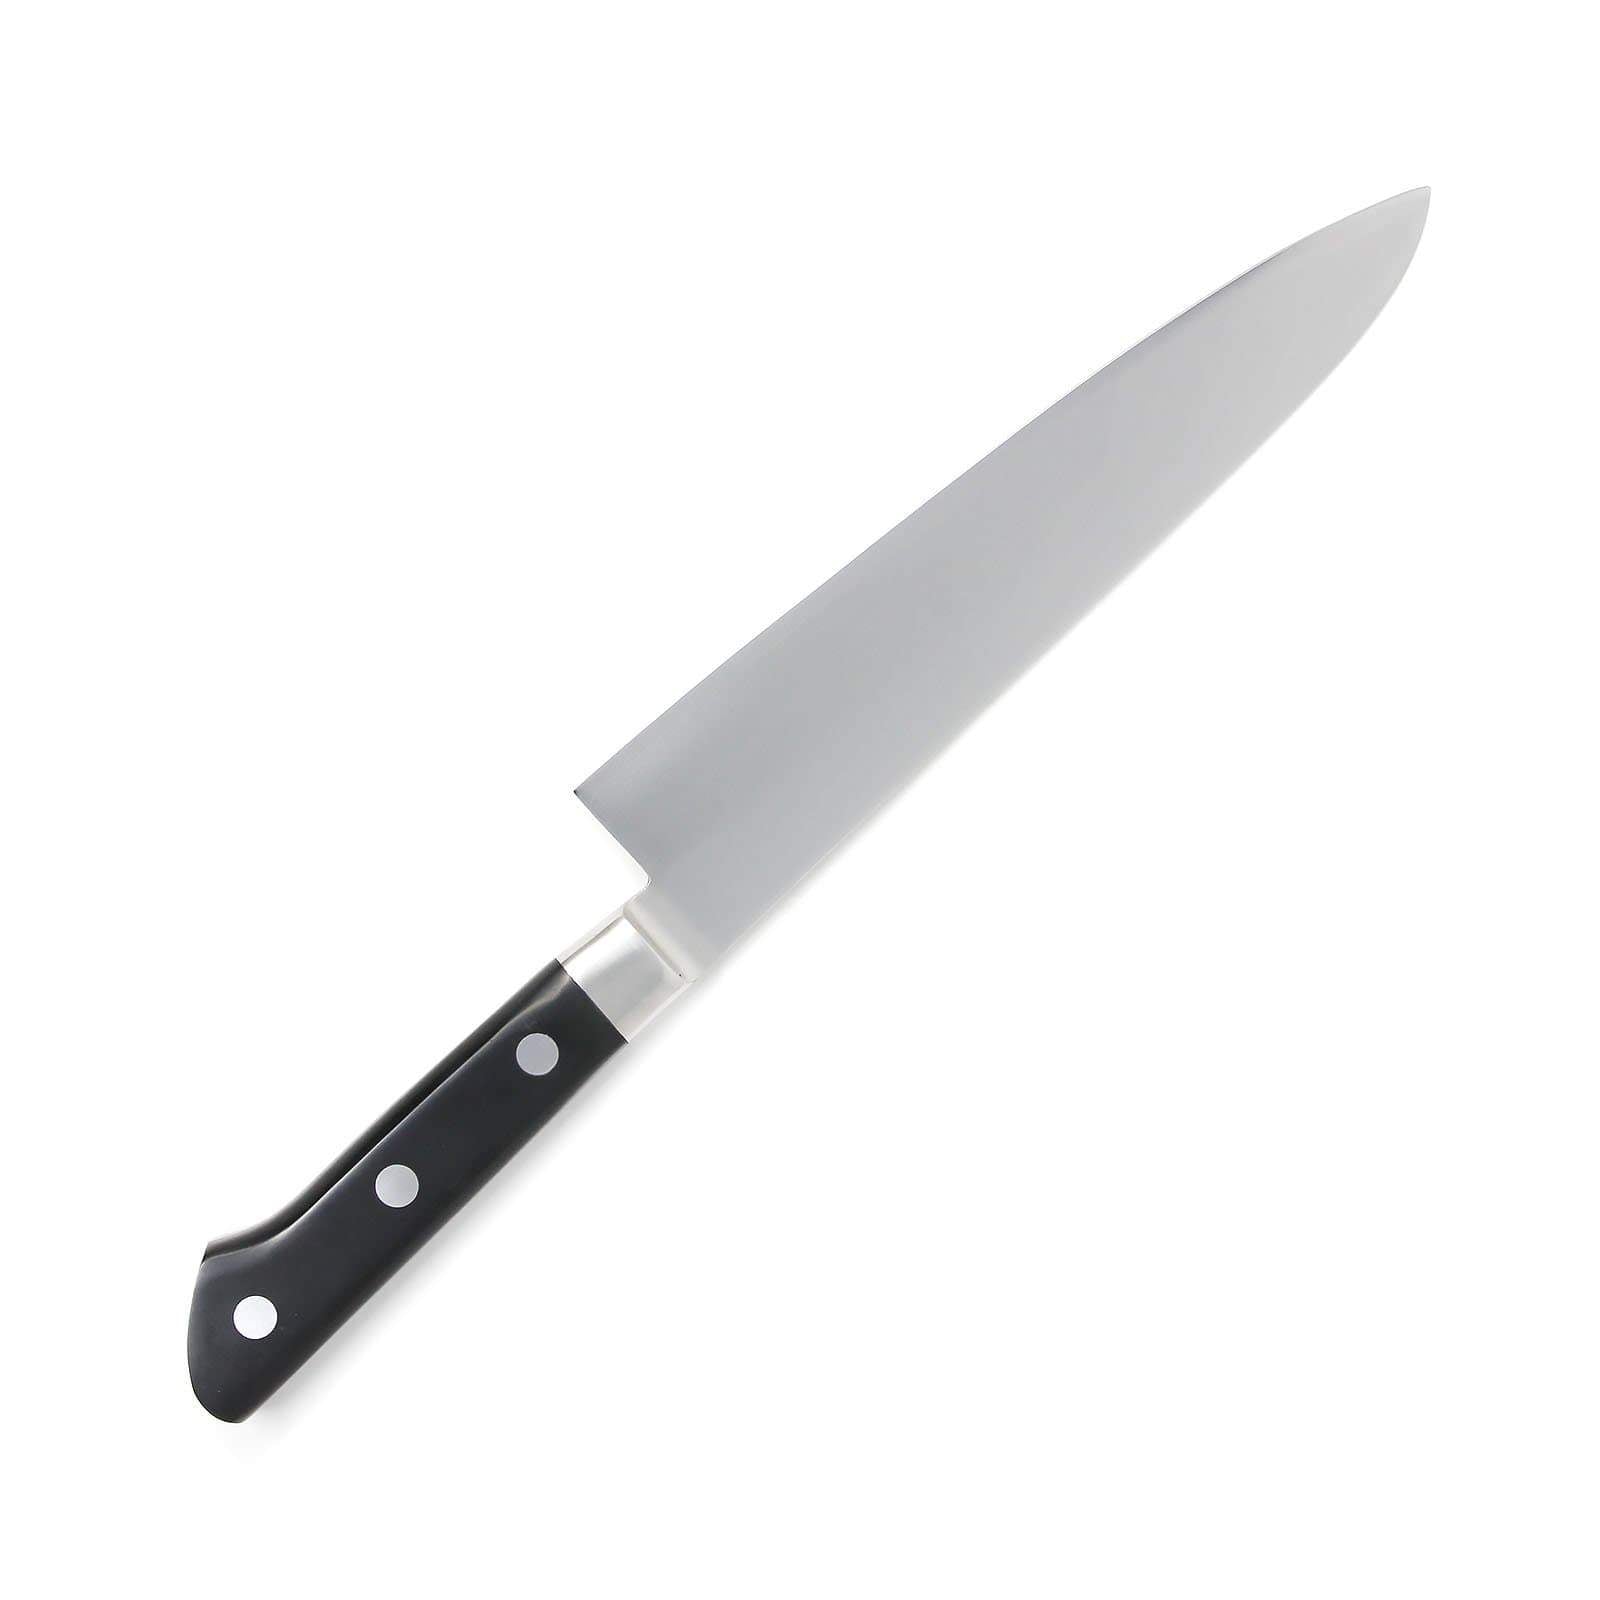 Tramontina Professional Line, A kitchen knife suitable for domestic or  professional use, FROZEN FOOD KNIFE - the knife is made of stainless steel.  The size of the blade is 23.0 cm and